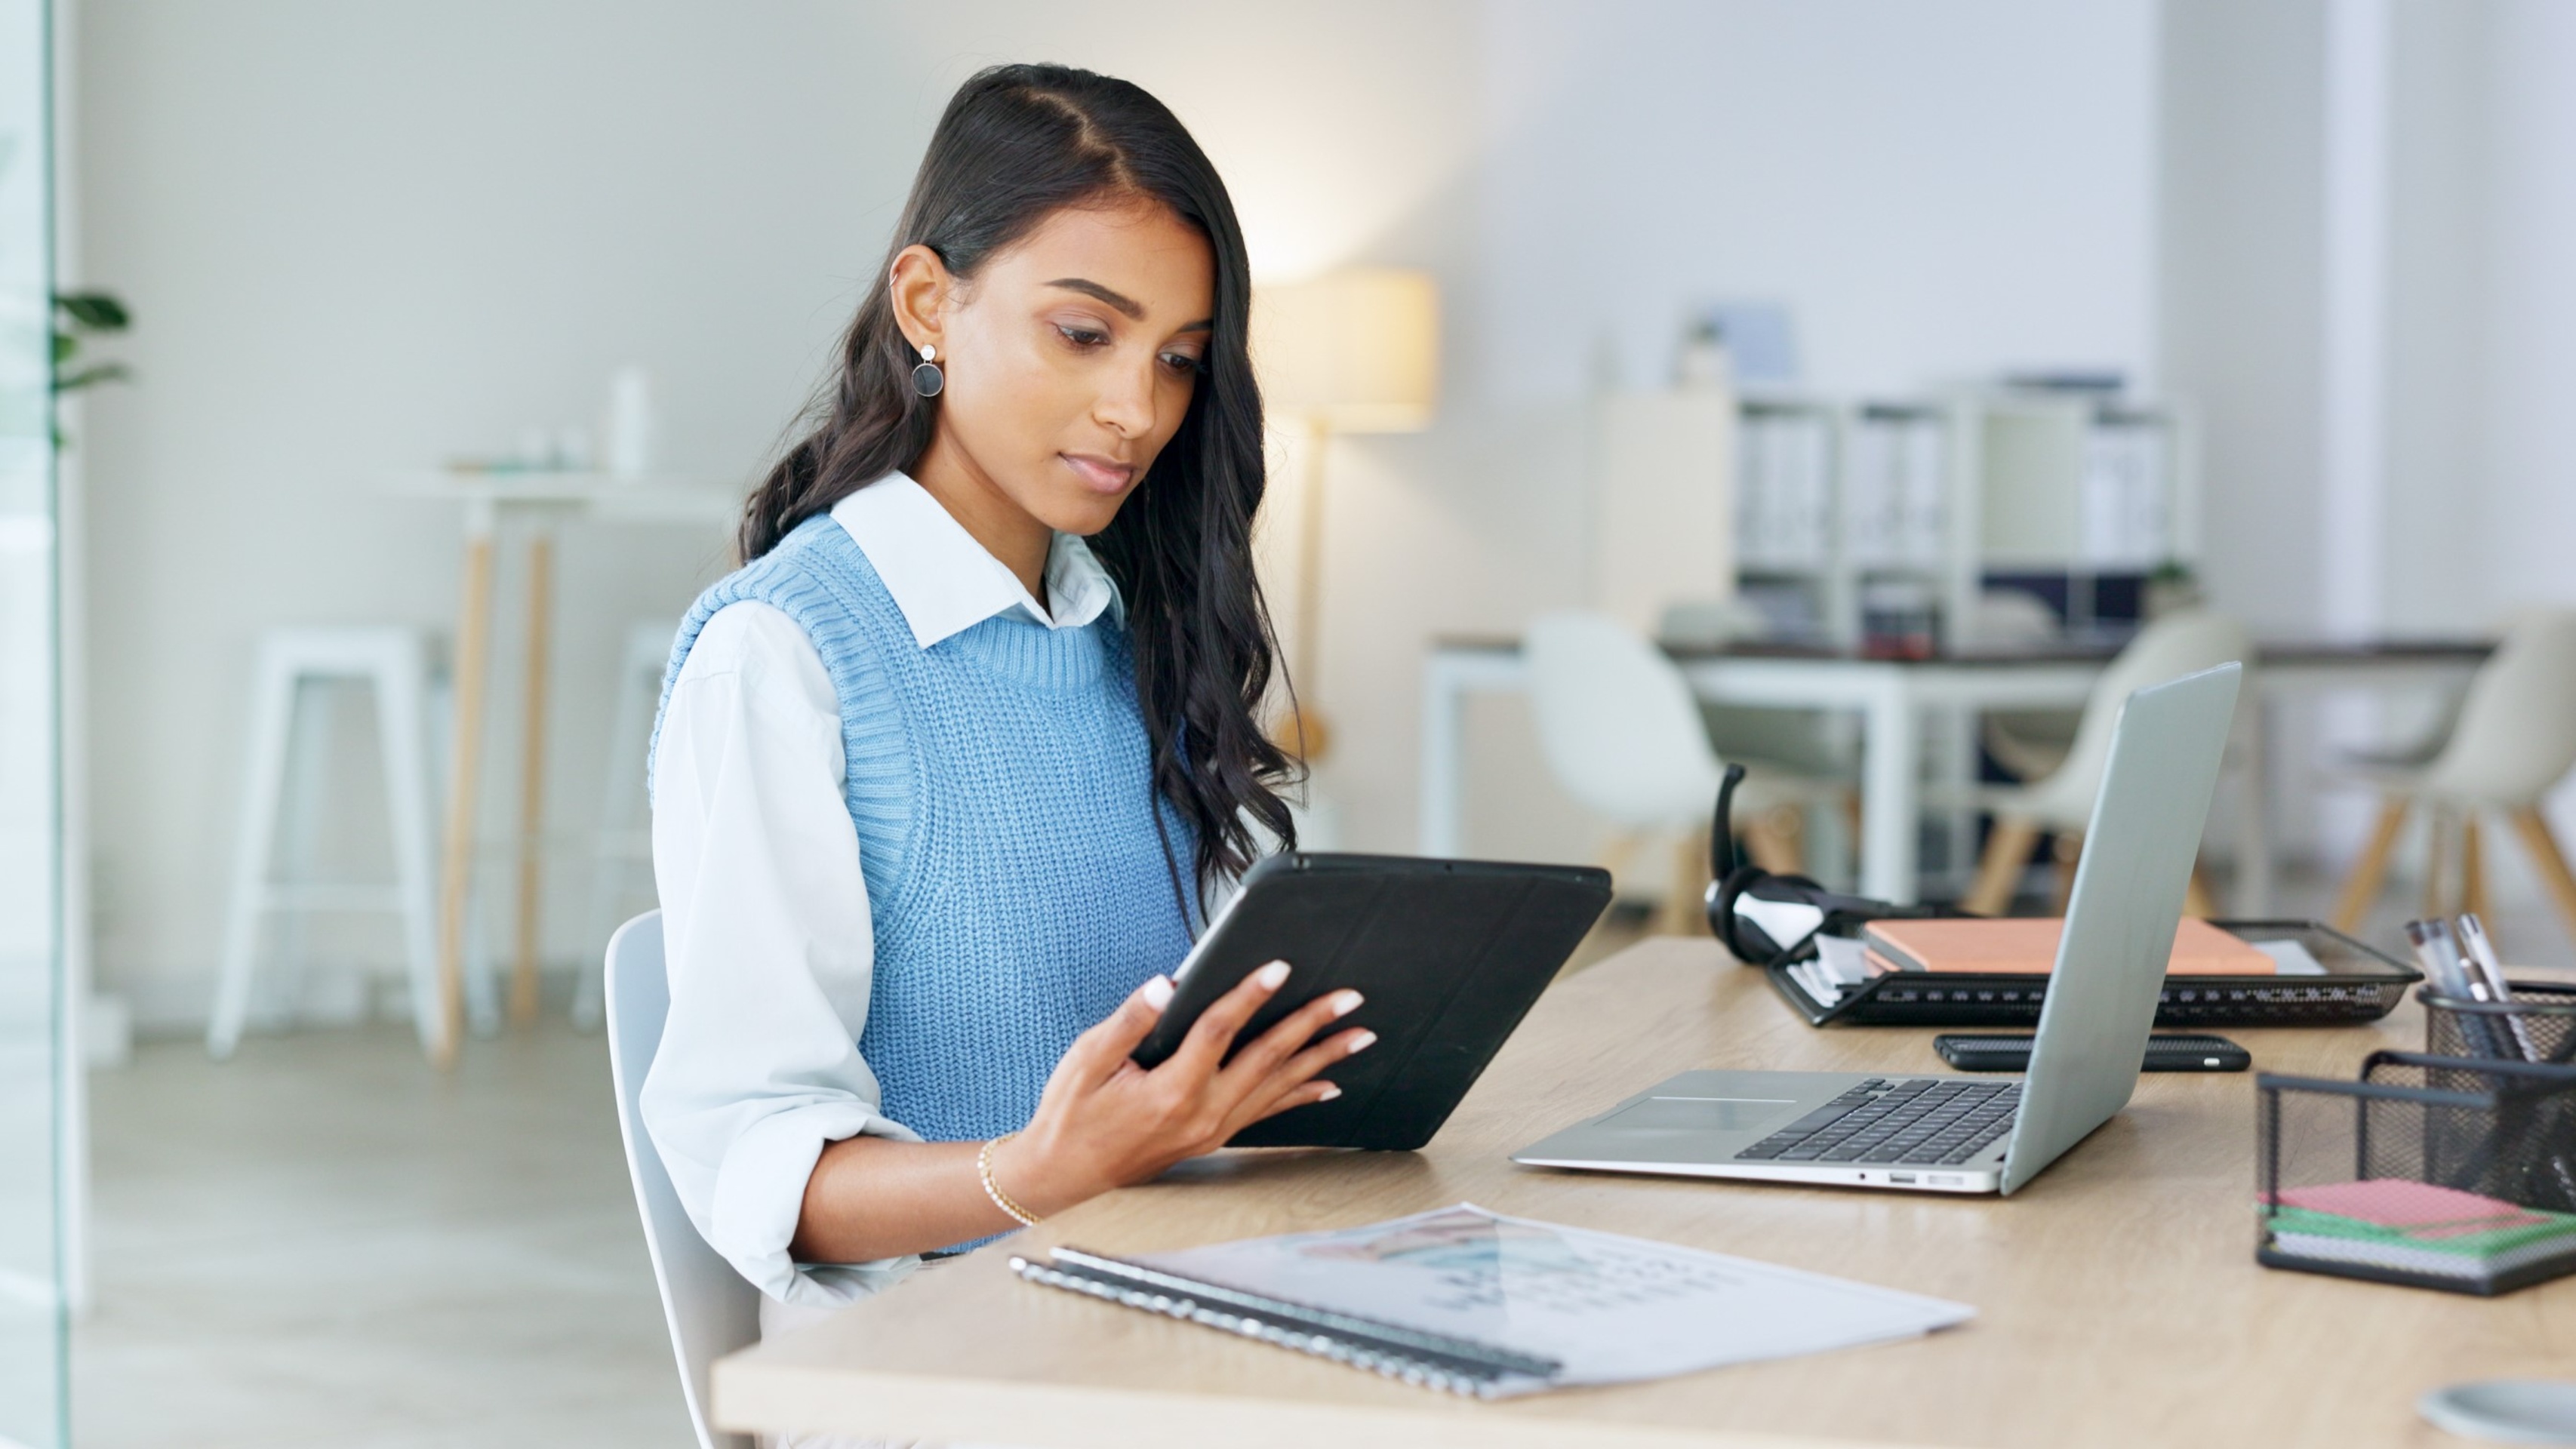 Trendy marketing professional using an online app to network, meet deadlines and stay connected during office hours. Young business woman using her laptop and tablet while working in the office.